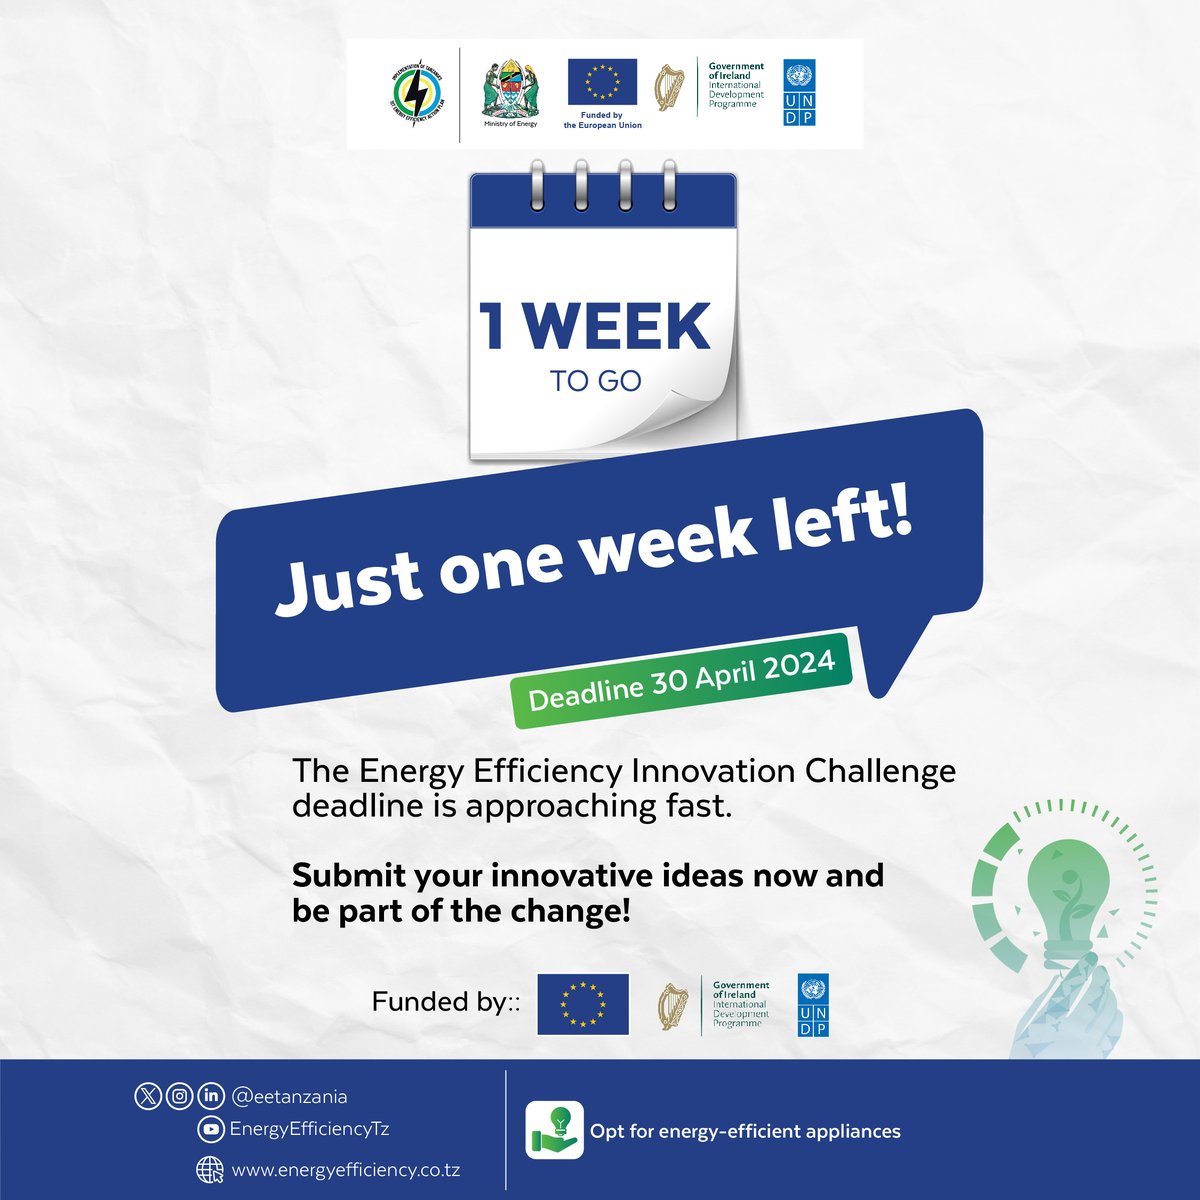 Apply to the Energy Efficiency Innovation Challenge and stand a chance to win up to 25,000,000 TZS. 
Learn more at: energyefficiency.co.tz
#EnergyEfficiency #InnovationChallenge #SustainableFuture
@EUinTZ @undptz @nishati2017 @IrlEmbTanzania